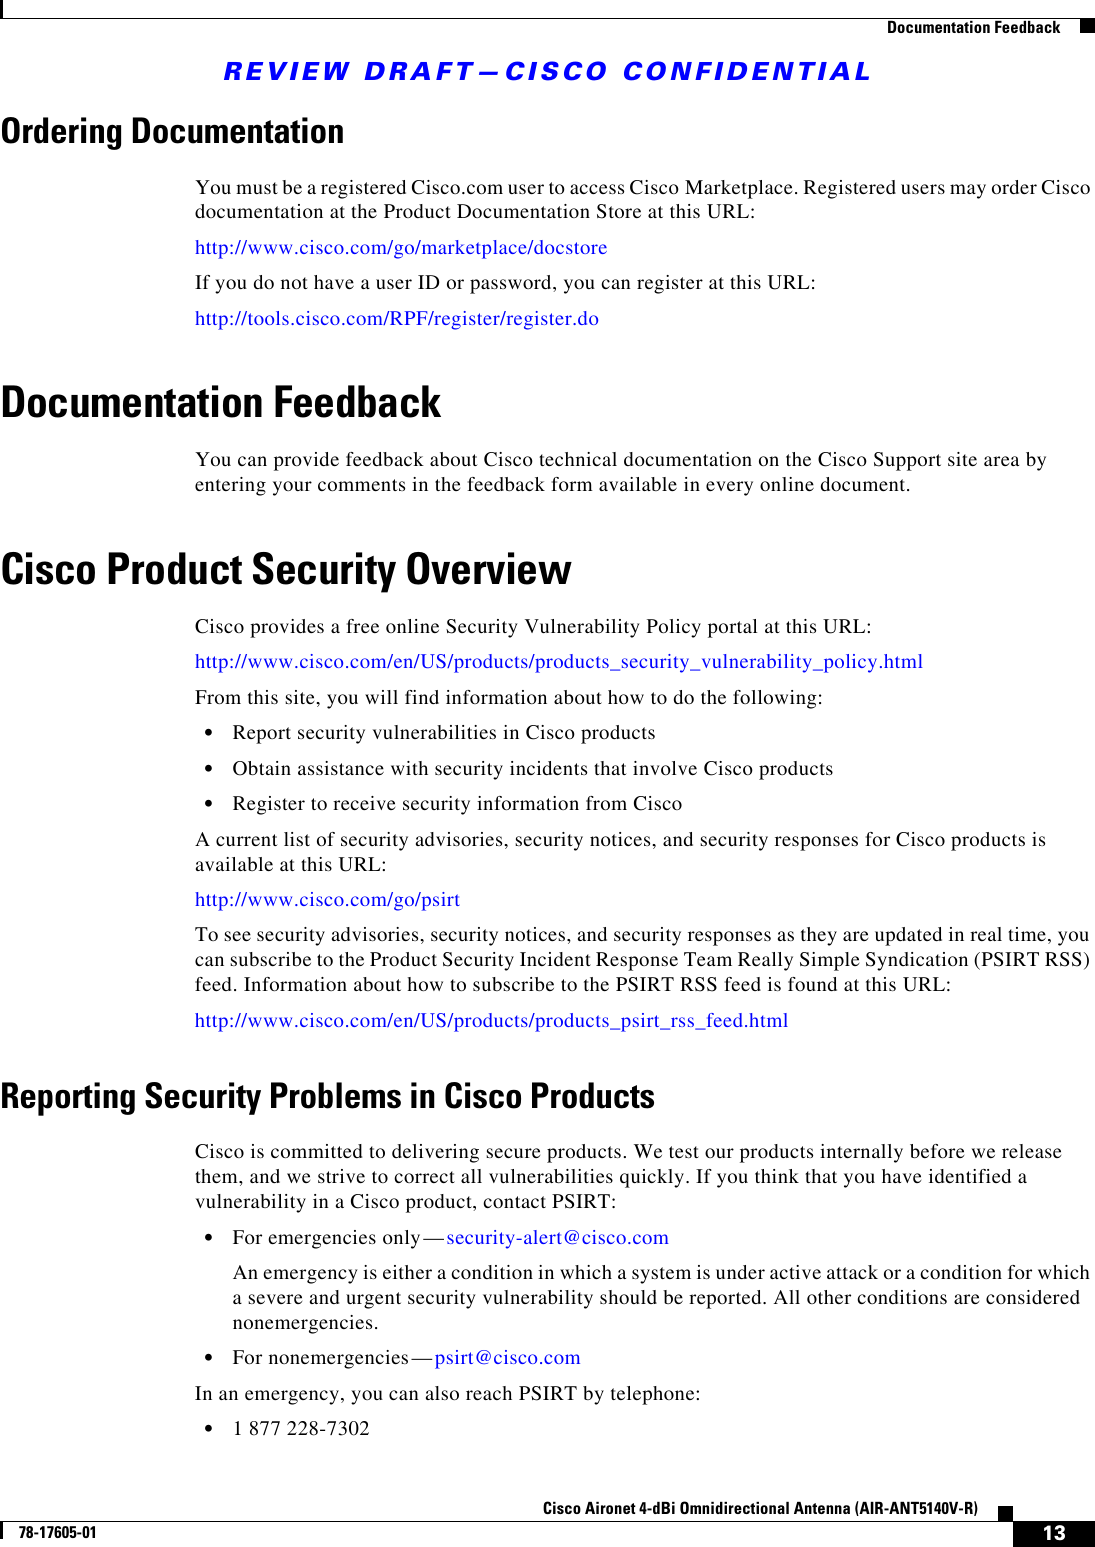 REVIEW DRAFT—CISCO CONFIDENTIAL13Cisco Aironet 4-dBi Omnidirectional Antenna (AIR-ANT5140V-R)78-17605-01  Documentation FeedbackOrdering DocumentationYou must be a registered Cisco.com user to access Cisco Marketplace. Registered users may order Cisco documentation at the Product Documentation Store at this URL: http://www.cisco.com/go/marketplace/docstoreIf you do not have a user ID or password, you can register at this URL:http://tools.cisco.com/RPF/register/register.doDocumentation FeedbackYou can provide feedback about Cisco technical documentation on the Cisco Support site area by entering your comments in the feedback form available in every online document.Cisco Product Security OverviewCisco provides a free online Security Vulnerability Policy portal at this URL:http://www.cisco.com/en/US/products/products_security_vulnerability_policy.htmlFrom this site, you will find information about how to do the following:•Report security vulnerabilities in Cisco products•Obtain assistance with security incidents that involve Cisco products•Register to receive security information from CiscoA current list of security advisories, security notices, and security responses for Cisco products is available at this URL:http://www.cisco.com/go/psirtTo see security advisories, security notices, and security responses as they are updated in real time, you can subscribe to the Product Security Incident Response Team Really Simple Syndication (PSIRT RSS) feed. Information about how to subscribe to the PSIRT RSS feed is found at this URL:http://www.cisco.com/en/US/products/products_psirt_rss_feed.htmlReporting Security Problems in Cisco ProductsCisco is committed to delivering secure products. We test our products internally before we release them, and we strive to correct all vulnerabilities quickly. If you think that you have identified a vulnerability in a Cisco product, contact PSIRT:•For emergencies only— security-alert@cisco.comAn emergency is either a condition in which a system is under active attack or a condition for which a severe and urgent security vulnerability should be reported. All other conditions are considered nonemergencies.•For nonemergencies— psirt@cisco.comIn an emergency, you can also reach PSIRT by telephone:•1 877 228-7302